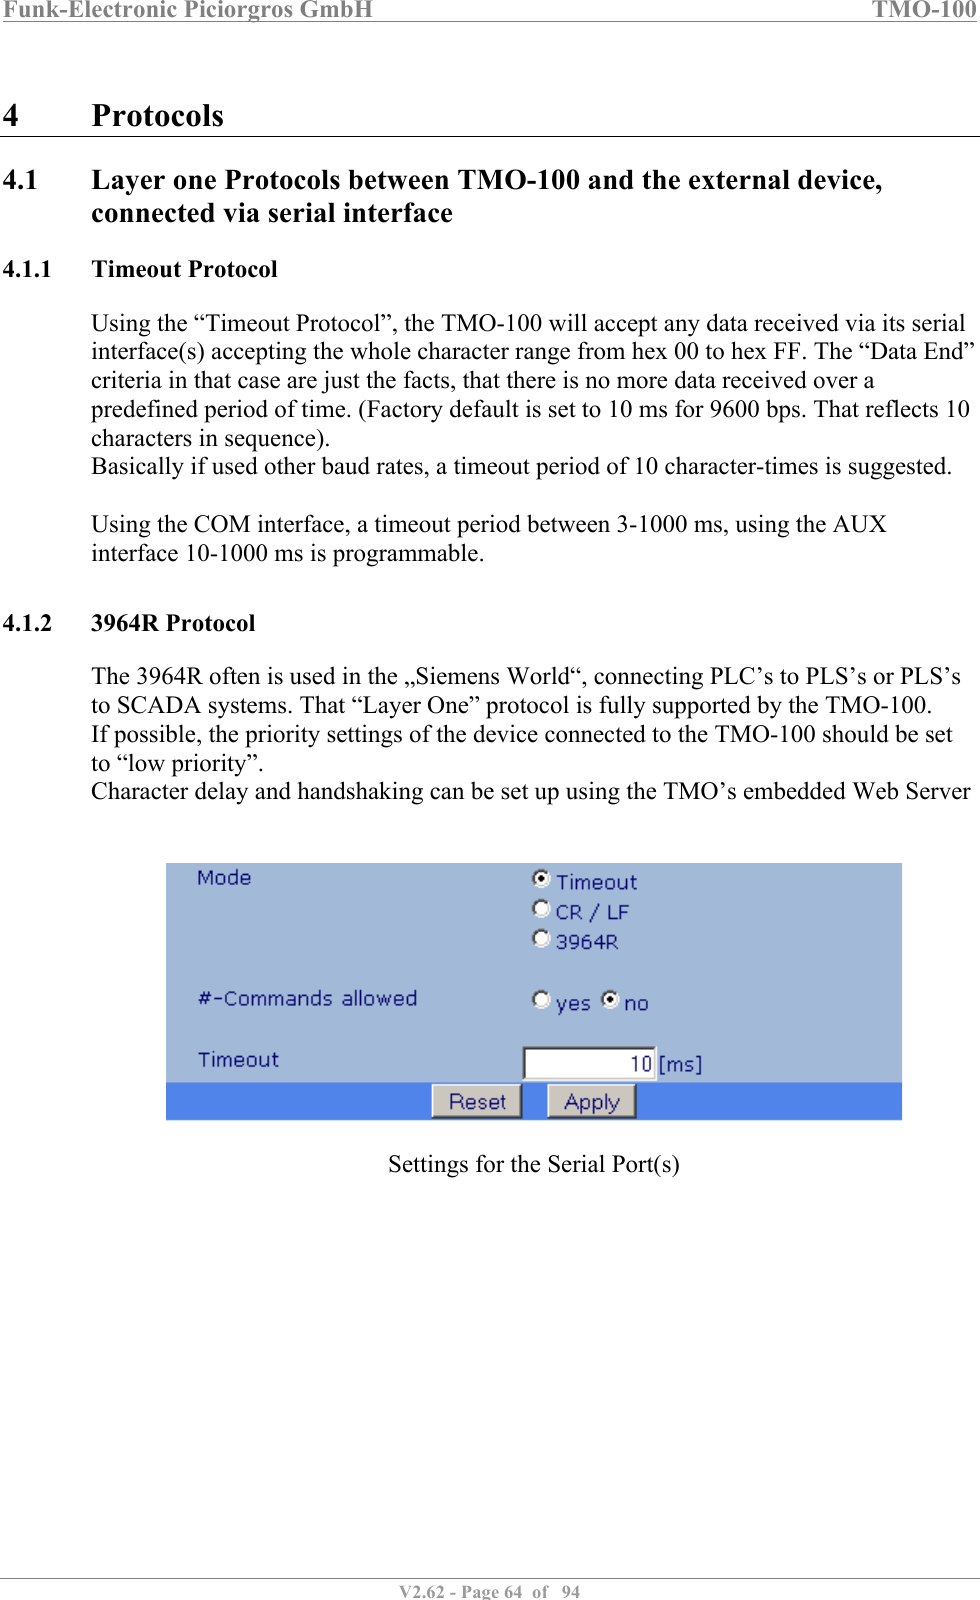 Funk-Electronic Piciorgros GmbH   TMO-100   V2.62 - Page 64  of   94   4 Protocols 4.1 Layer one Protocols between TMO-100 and the external device, connected via serial interface 4.1.1 Timeout Protocol Using the “Timeout Protocol”, the TMO-100 will accept any data received via its serial interface(s) accepting the whole character range from hex 00 to hex FF. The “Data End” criteria in that case are just the facts, that there is no more data received over a predefined period of time. (Factory default is set to 10 ms for 9600 bps. That reflects 10 characters in sequence).  Basically if used other baud rates, a timeout period of 10 character-times is suggested.  Using the COM interface, a timeout period between 3-1000 ms, using the AUX interface 10-1000 ms is programmable.    4.1.2 3964R Protocol The 3964R often is used in the „Siemens World“, connecting PLC’s to PLS’s or PLS’s to SCADA systems. That “Layer One” protocol is fully supported by the TMO-100.  If possible, the priority settings of the device connected to the TMO-100 should be set to “low priority”. Character delay and handshaking can be set up using the TMO’s embedded Web Server     Settings for the Serial Port(s)  